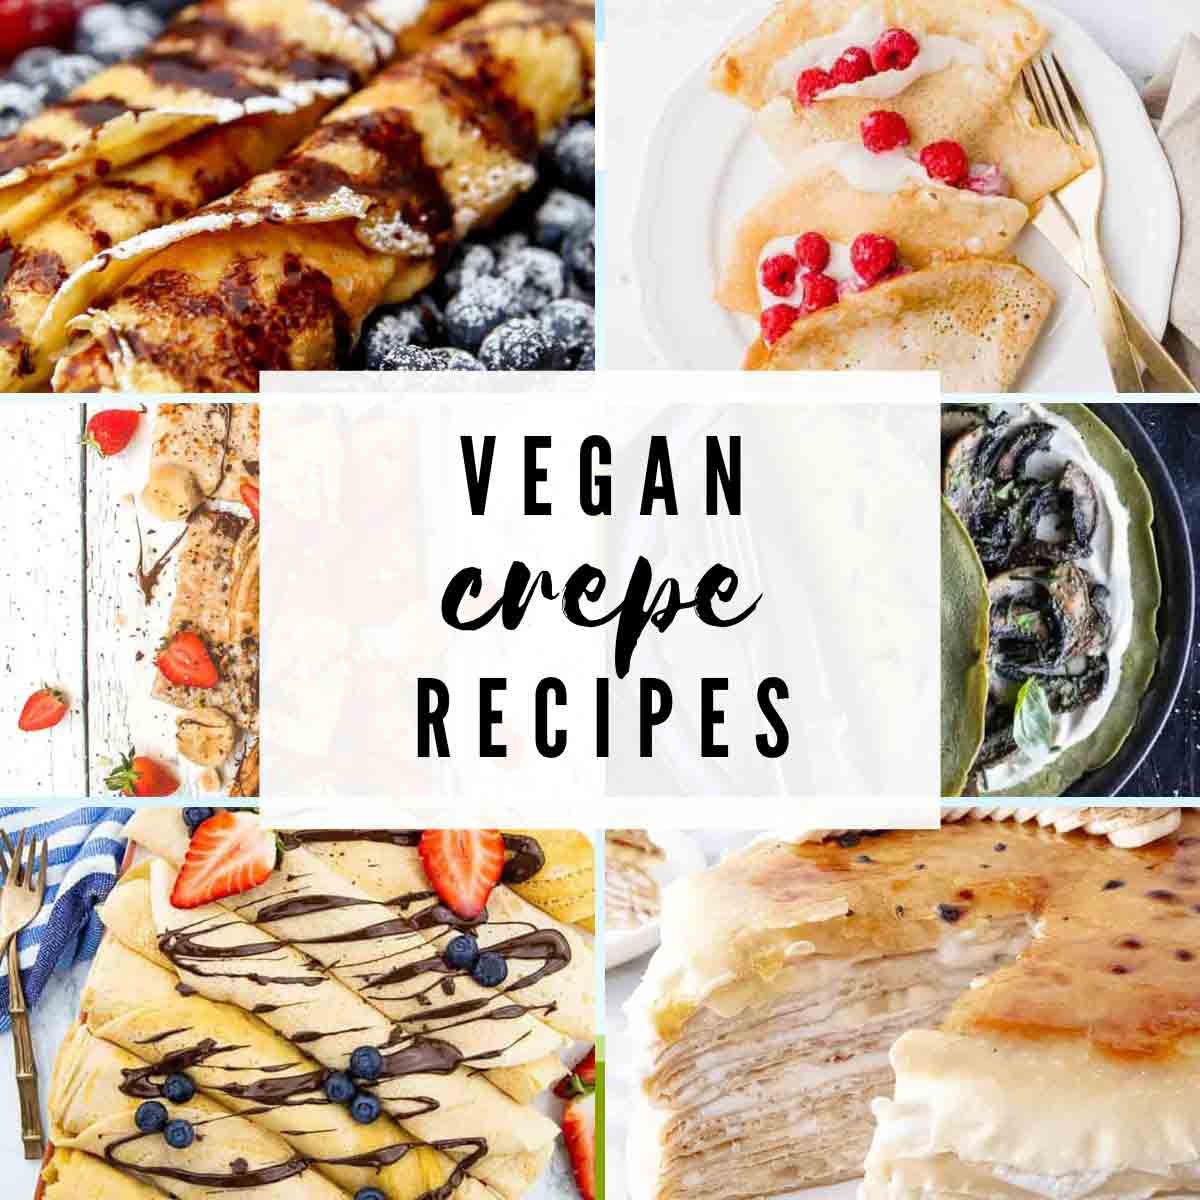 Crepe Images With Text Overlay That Reads 'vegan Crepe Recipes'